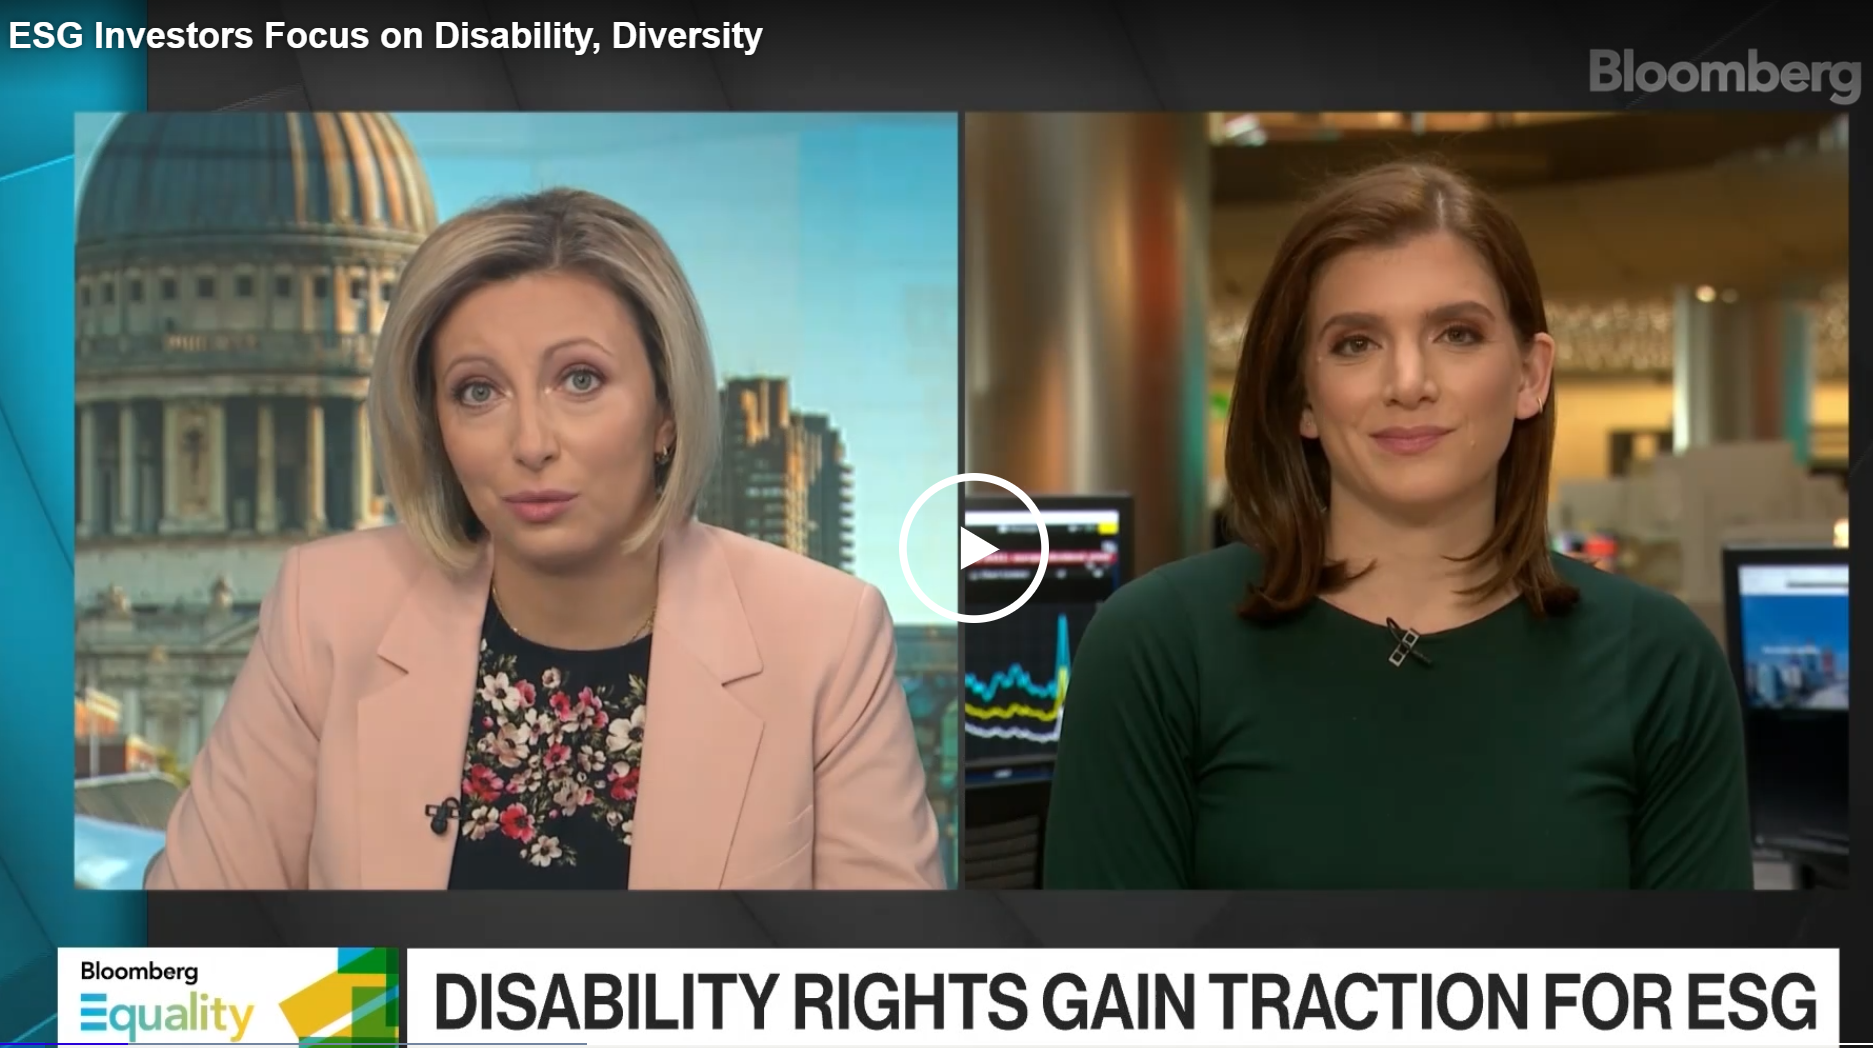 Bloomberg video screengrab showing two women. Title of segment "Disability Rights gain traction for ESG"